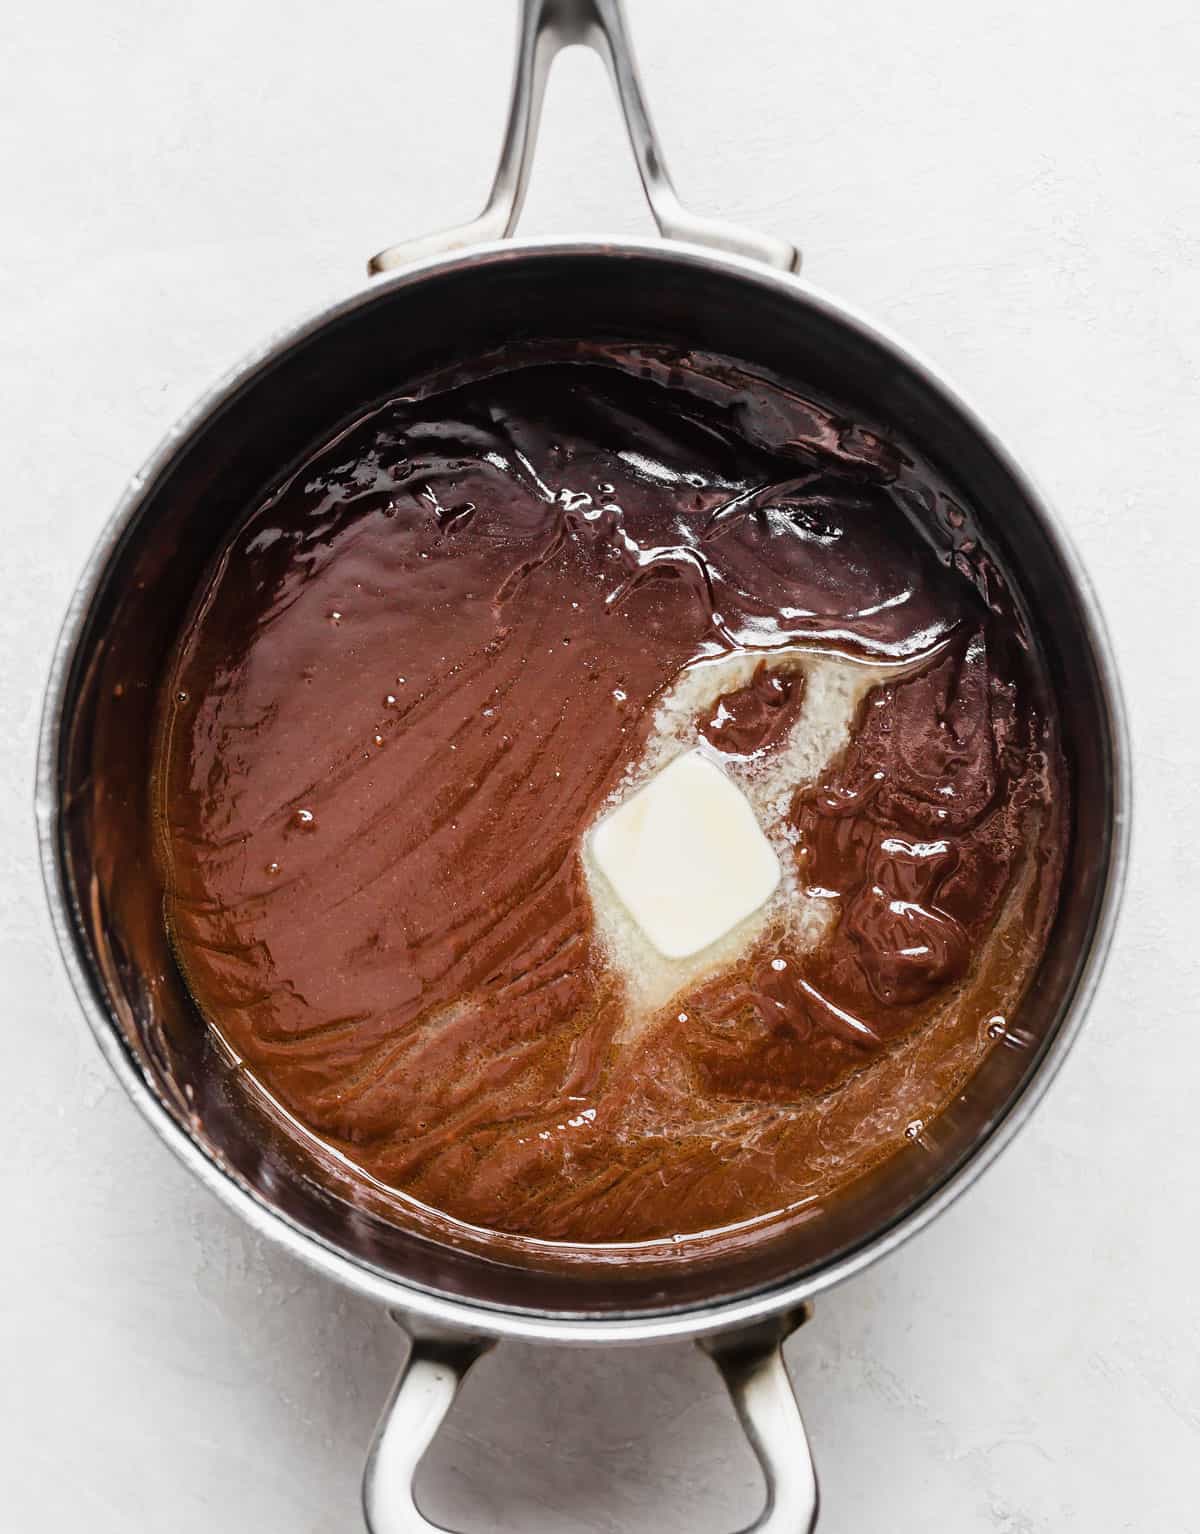 A tablespoon of butter melting into homemade hot fudge sauce in a saucepan.